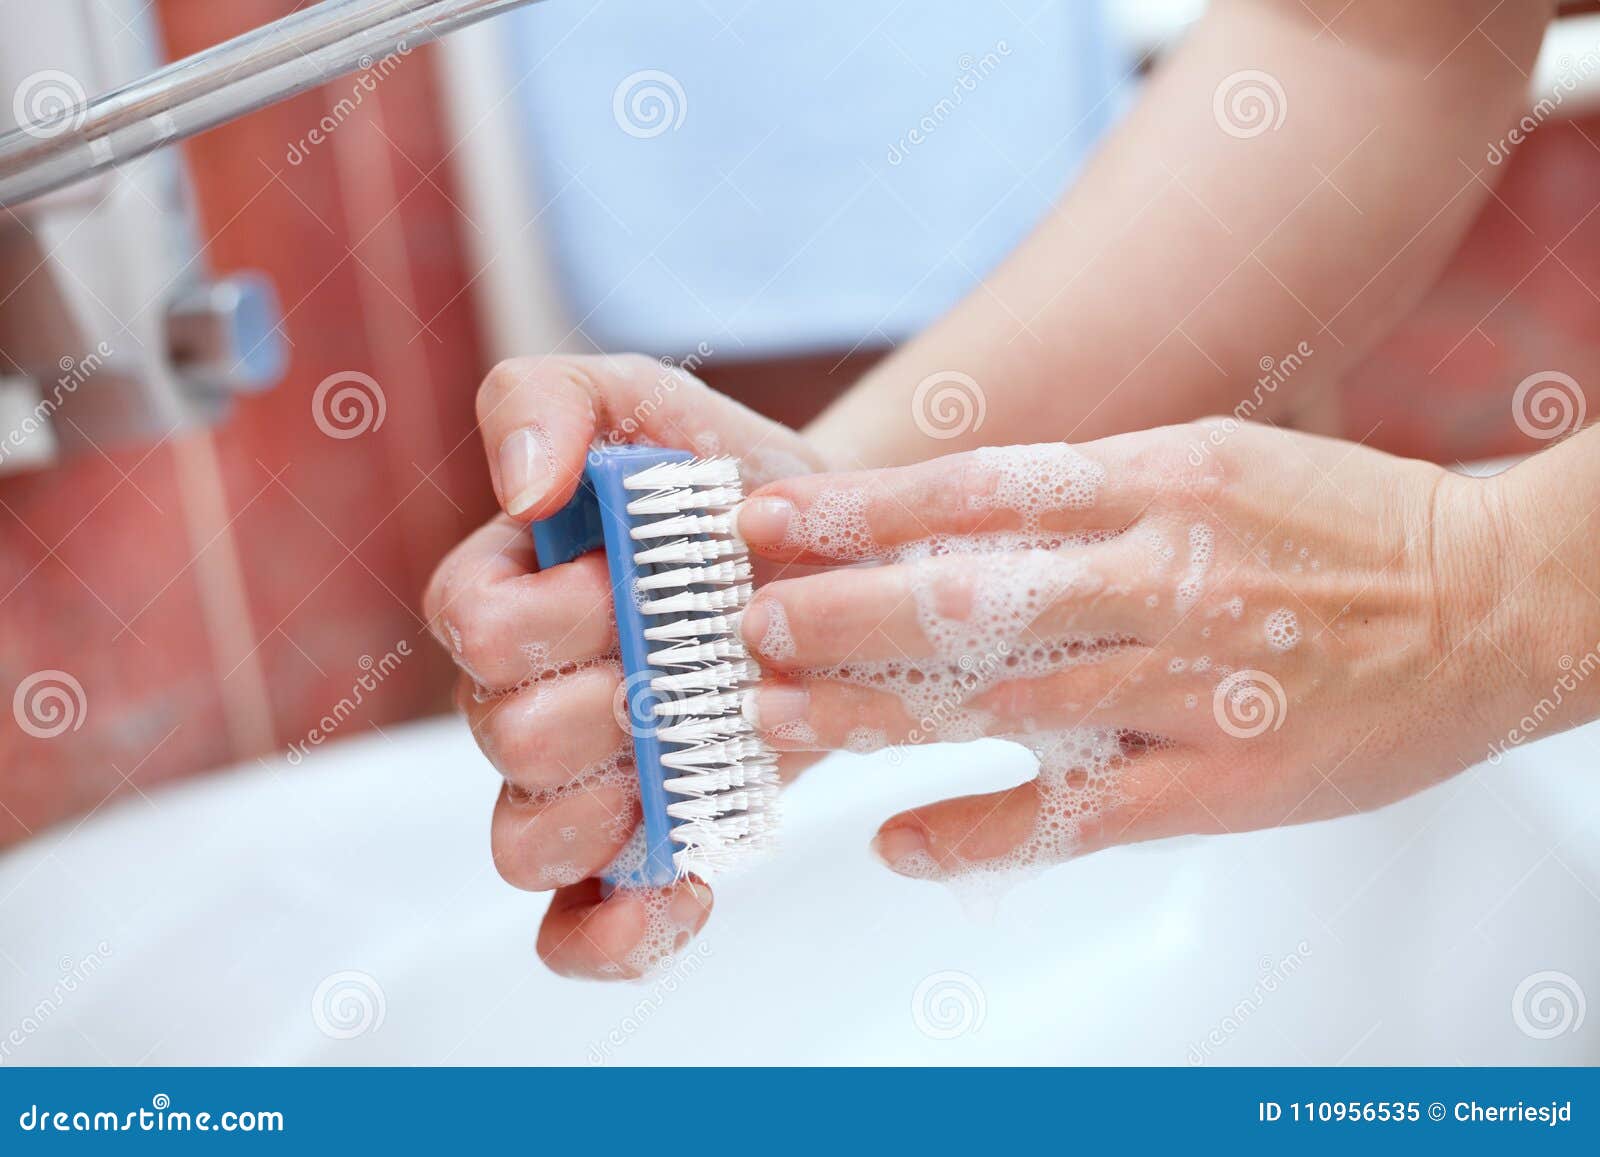 Washing Hands and Cleaning Nails with Brush Stock Image - Image of clean,  prevention: 110956535